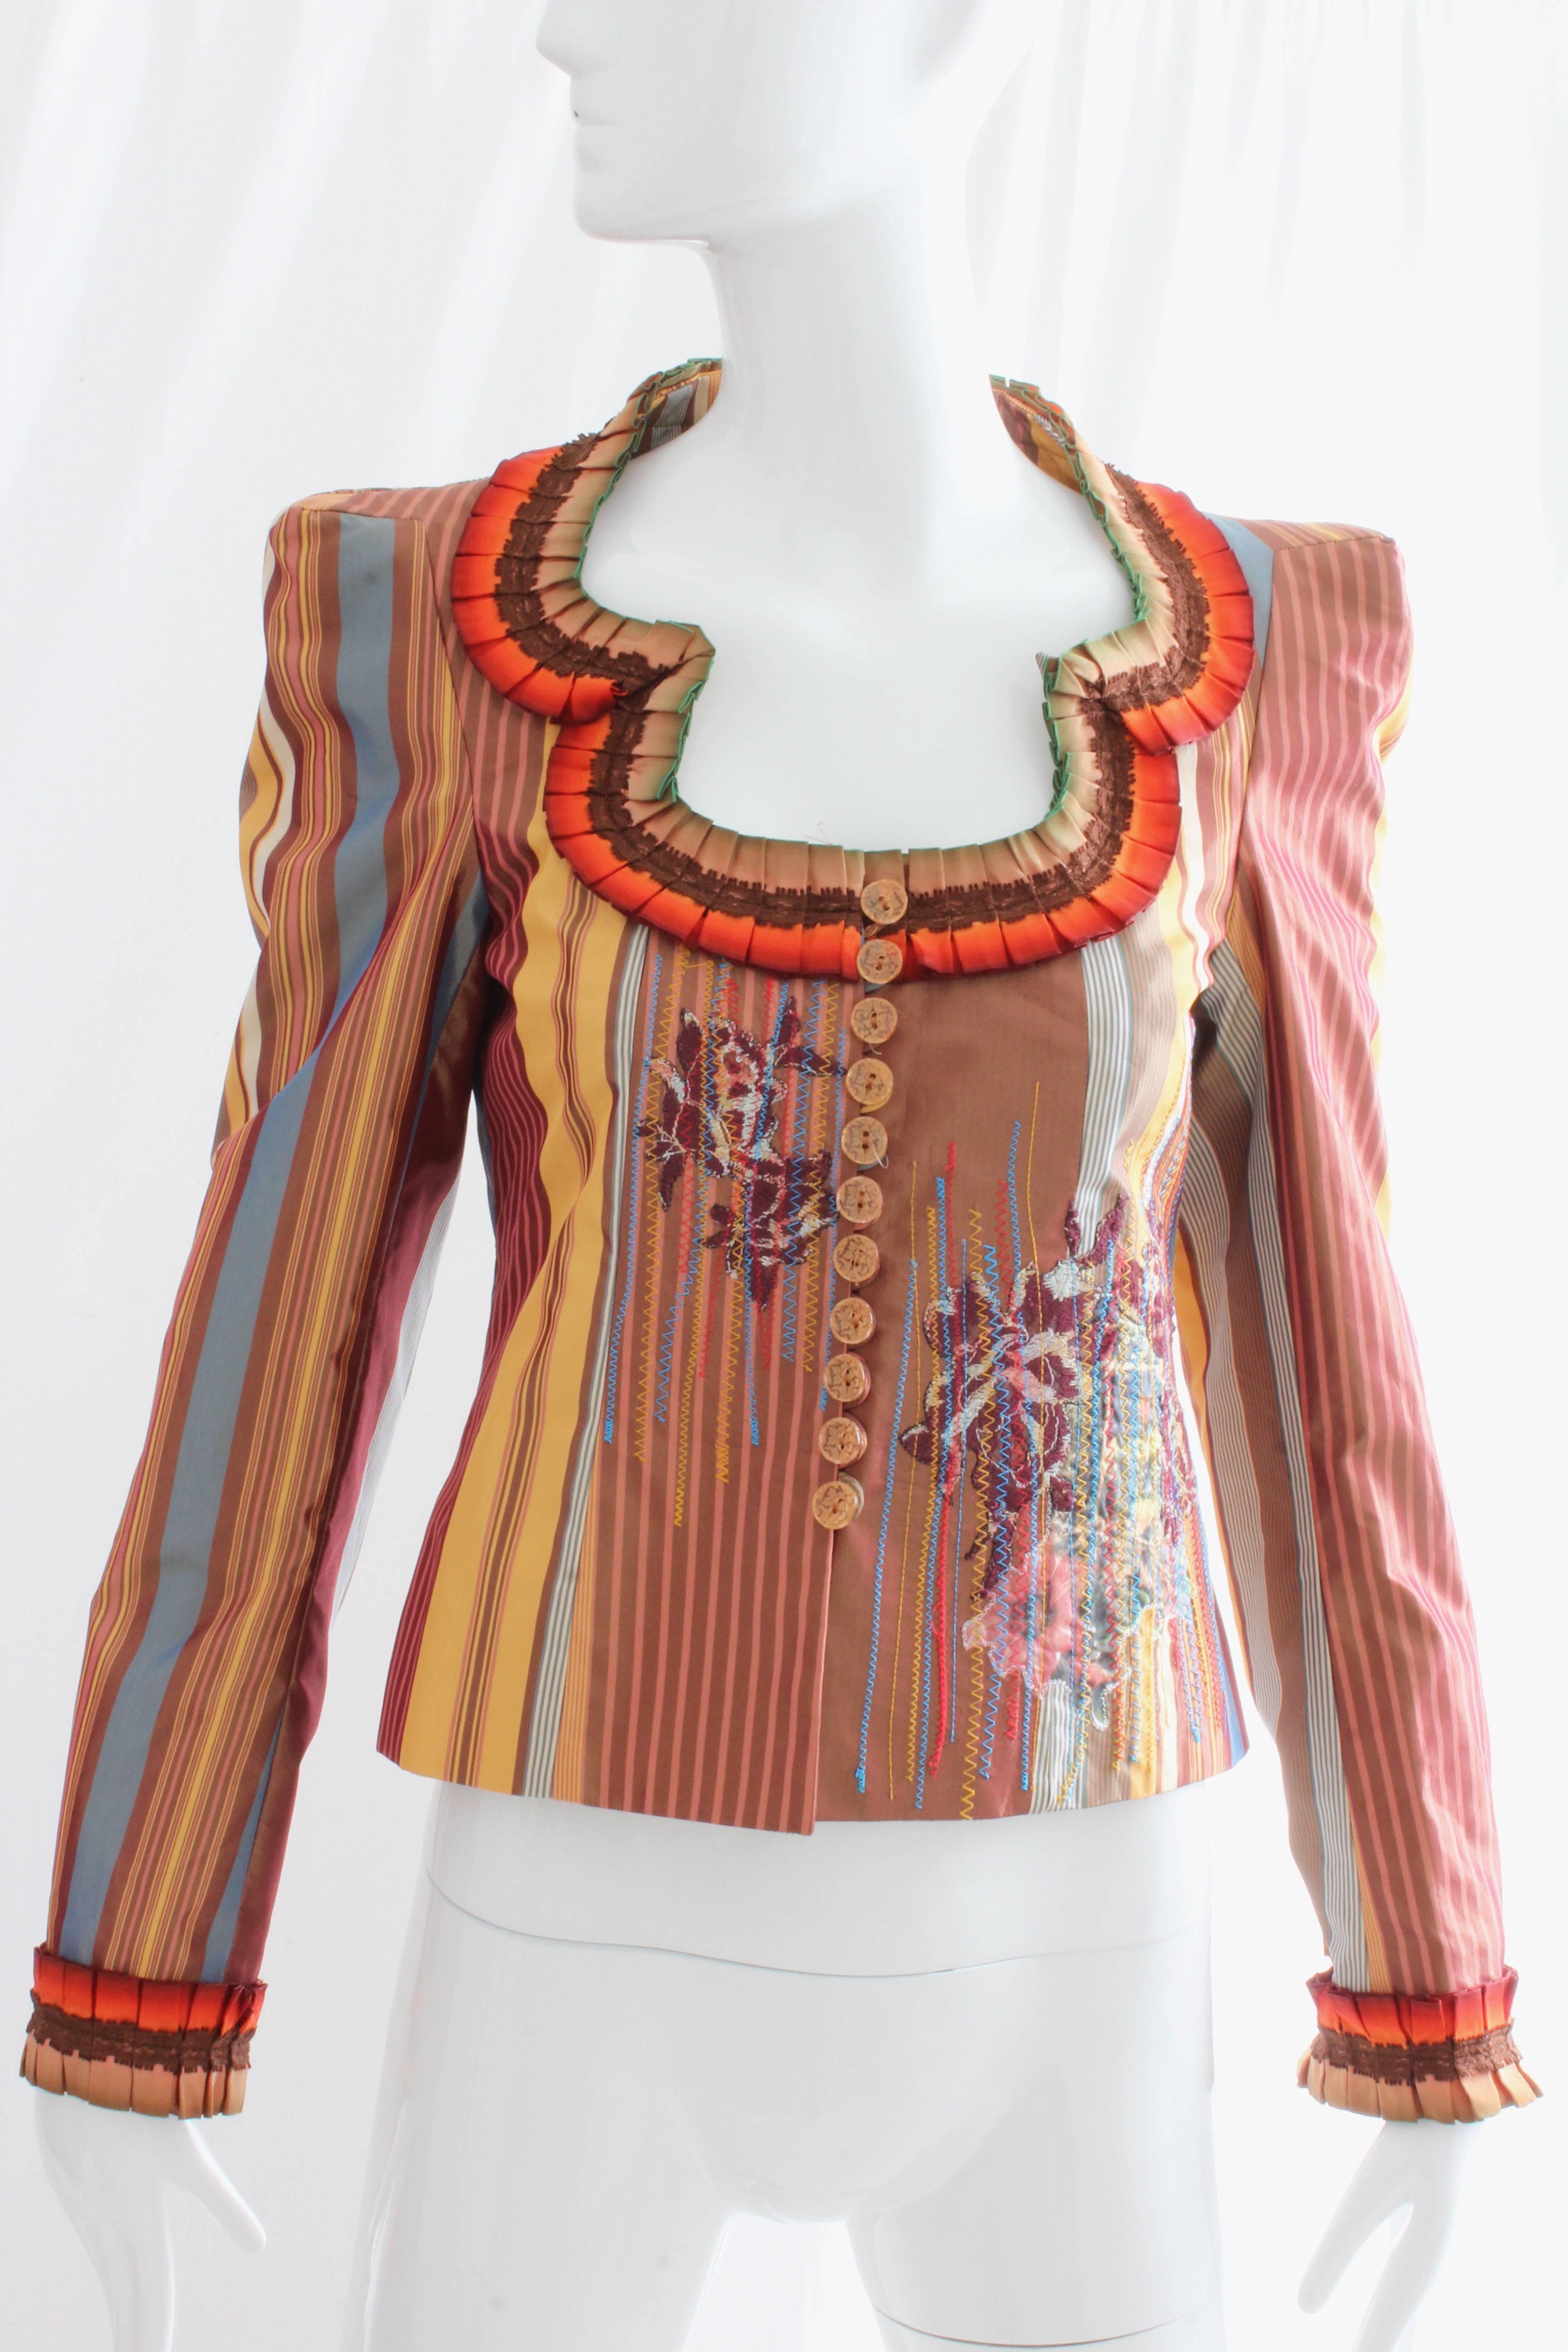 This fabulous jacket is from Christian Lacroix.  Made from 100% silk, it features a cacophony of colors, textures, photos and embroidery, a signature of the designer's earlier work.  This piece is dead stock, and still retains its tags.  In pristine